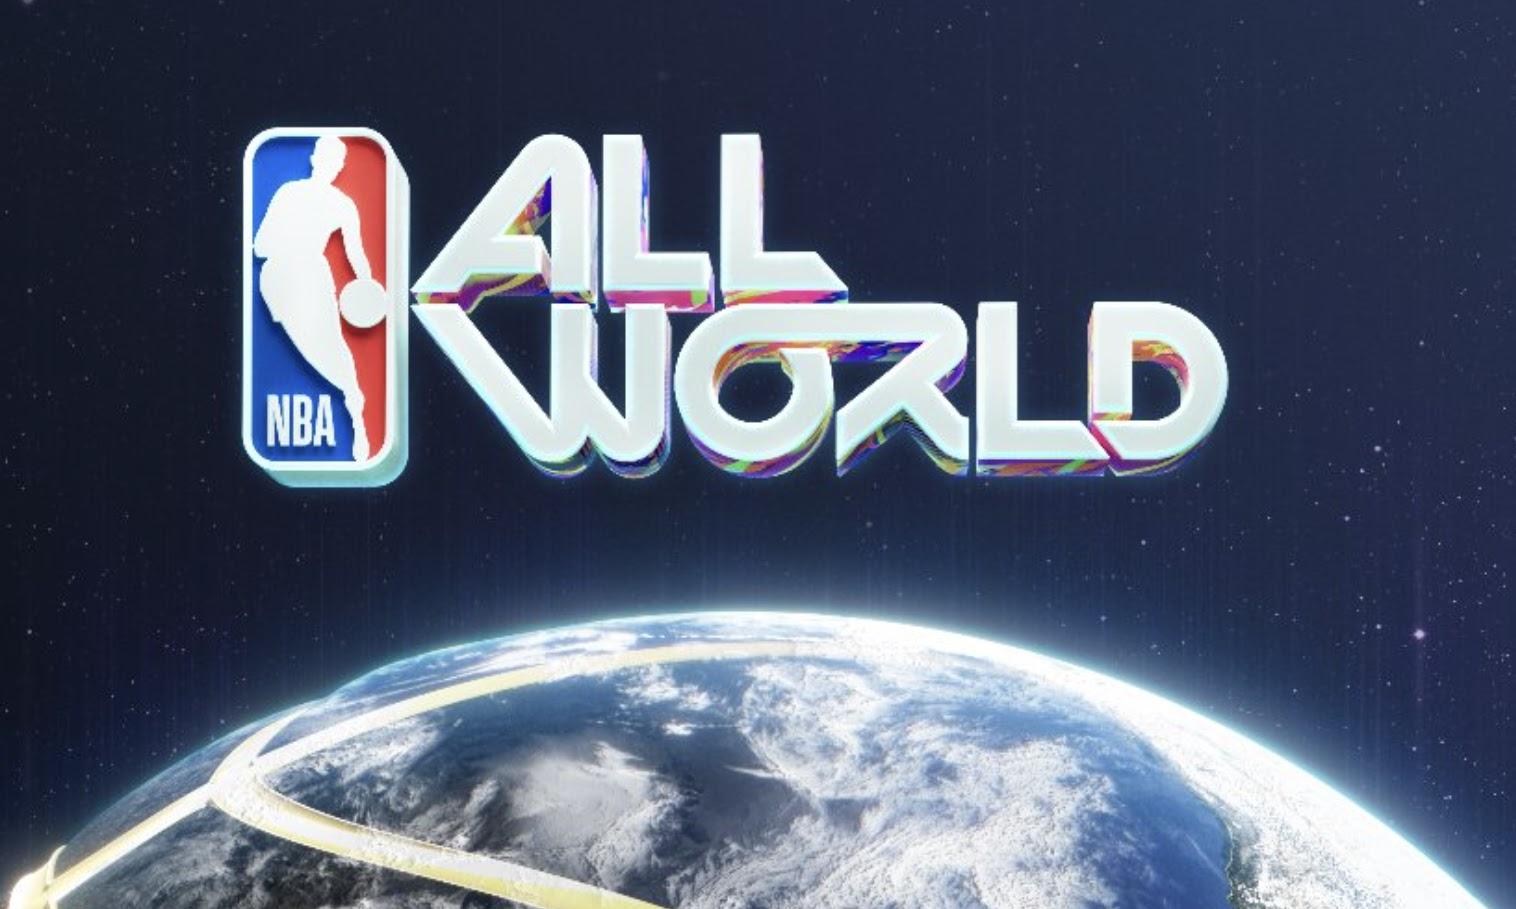 Nba All World Launches On January Niantic Labs